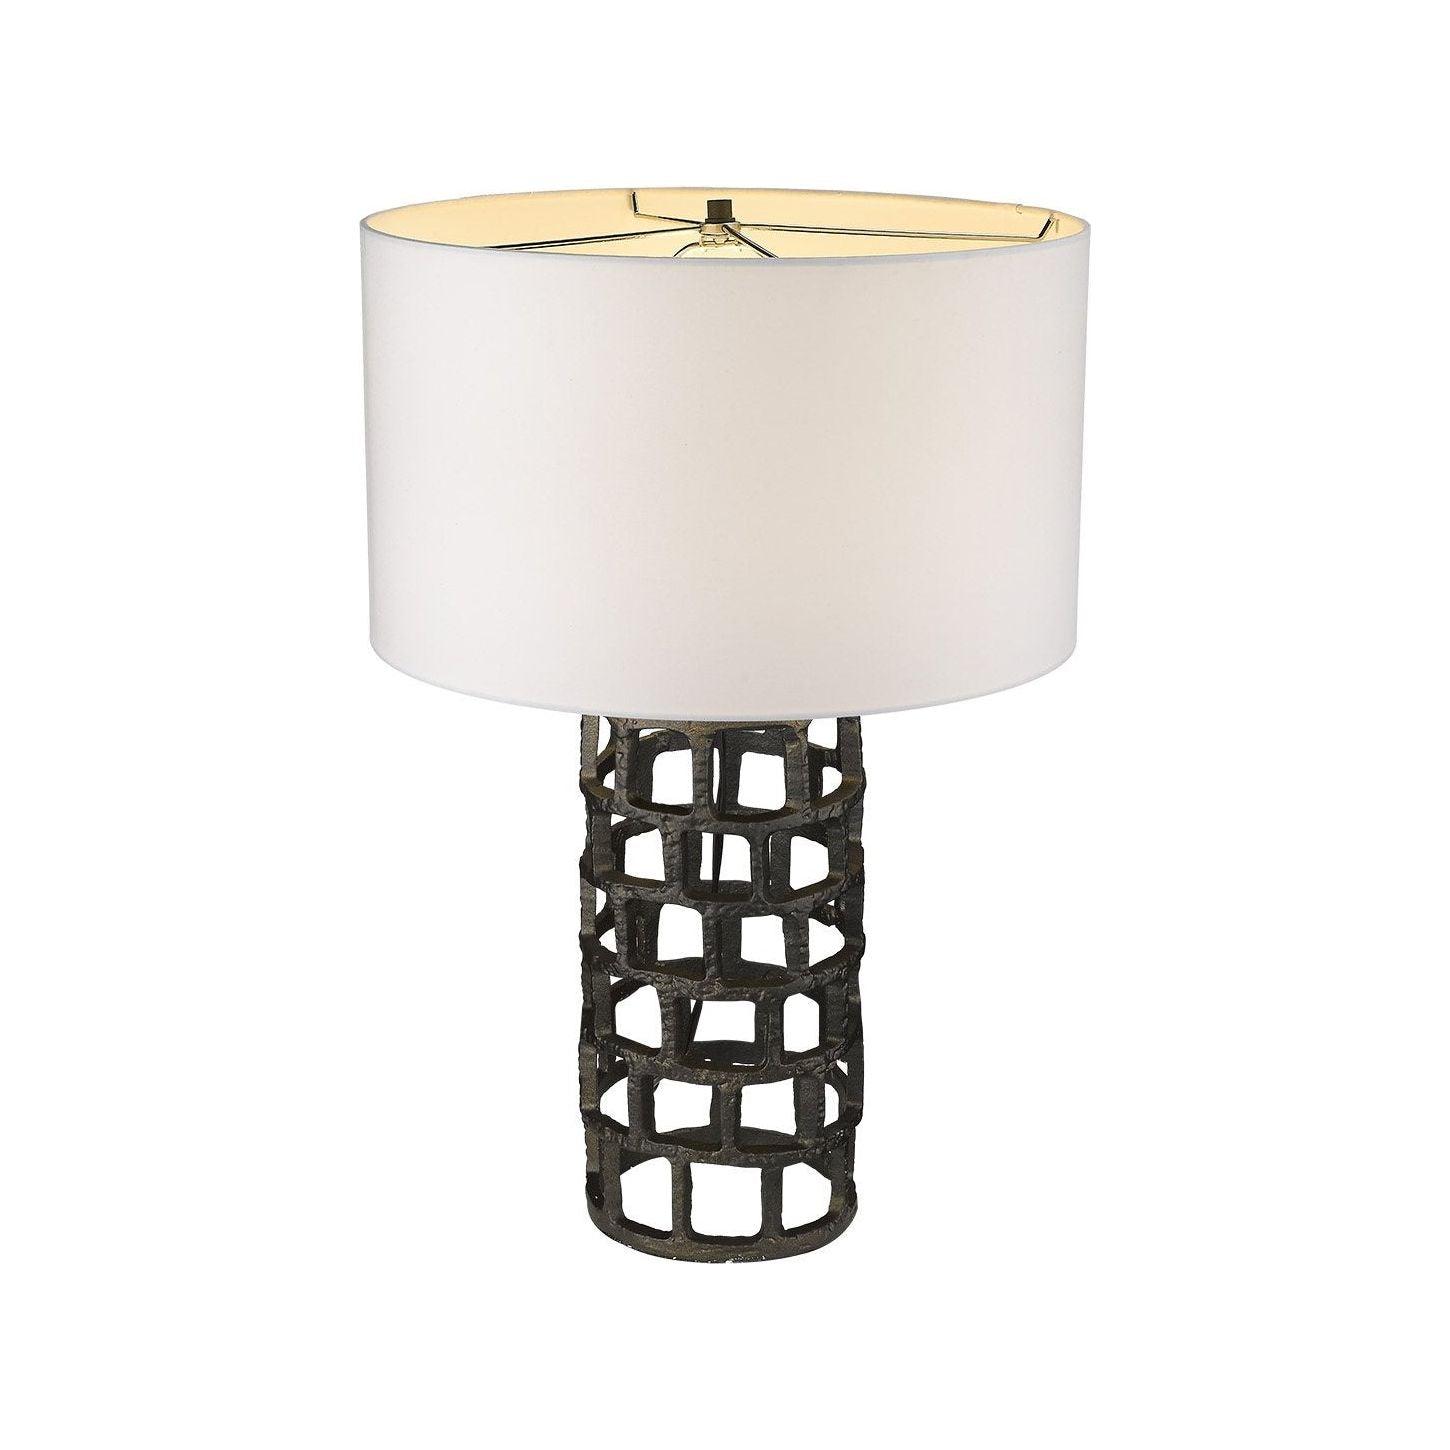 Trend - Vallin Table Lamp - Lights Canada